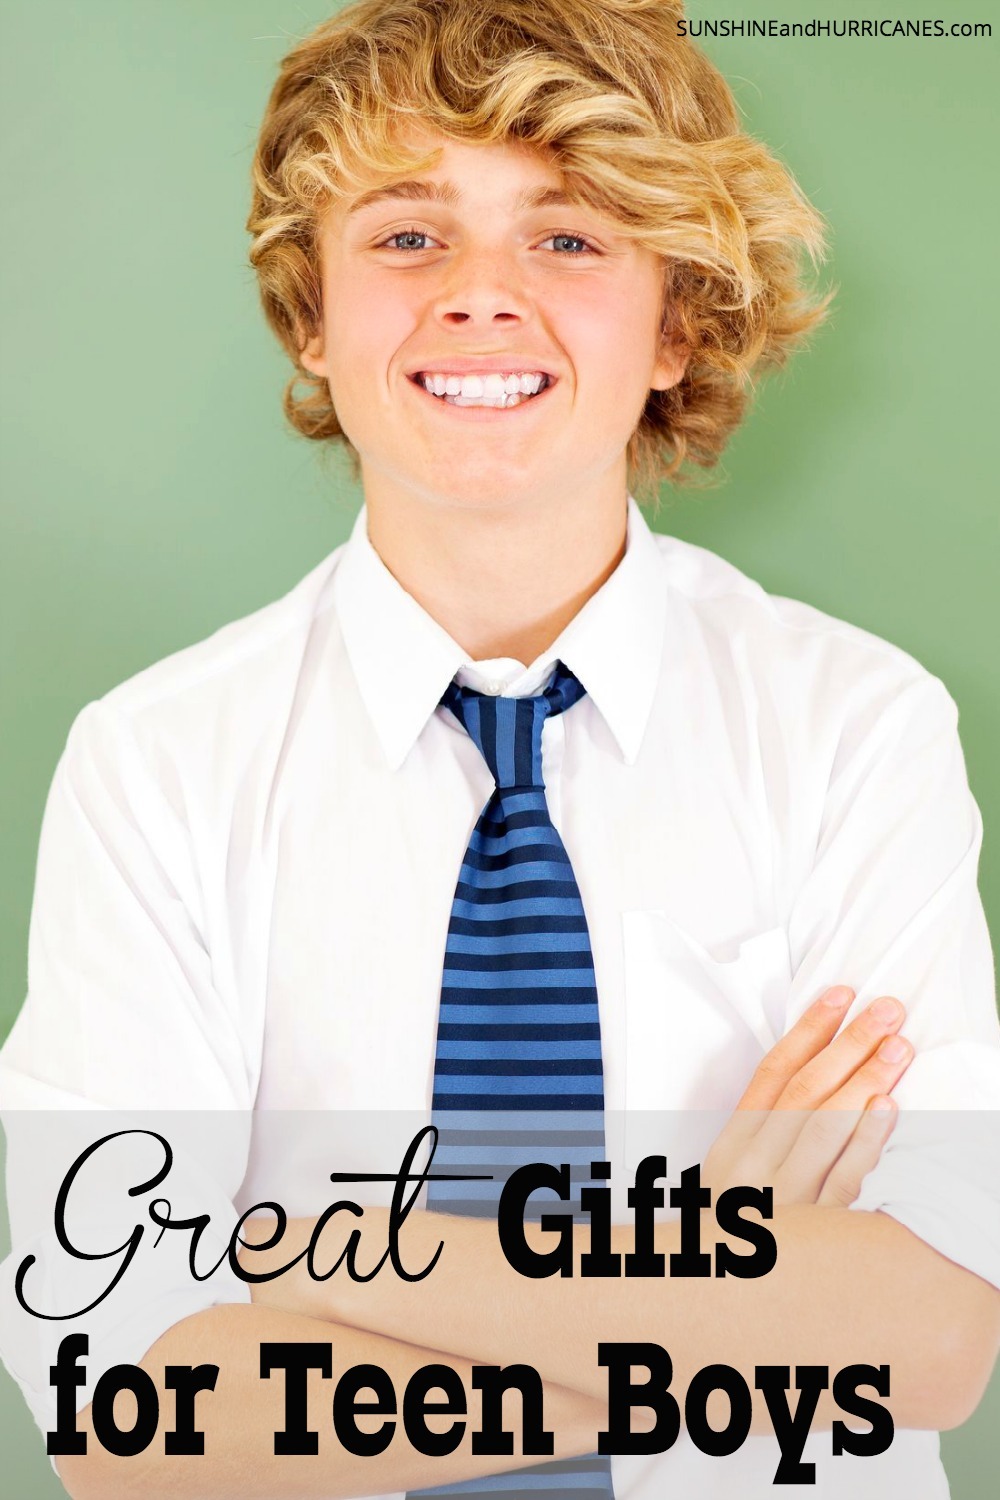 Christmas Gifts For Young Men - Healthy Holiday Gift Guide {Part 3} :: 20 Great Green ... - If you're looking for gifts for young adults who are dealing with stress, this box set is a great way to go.